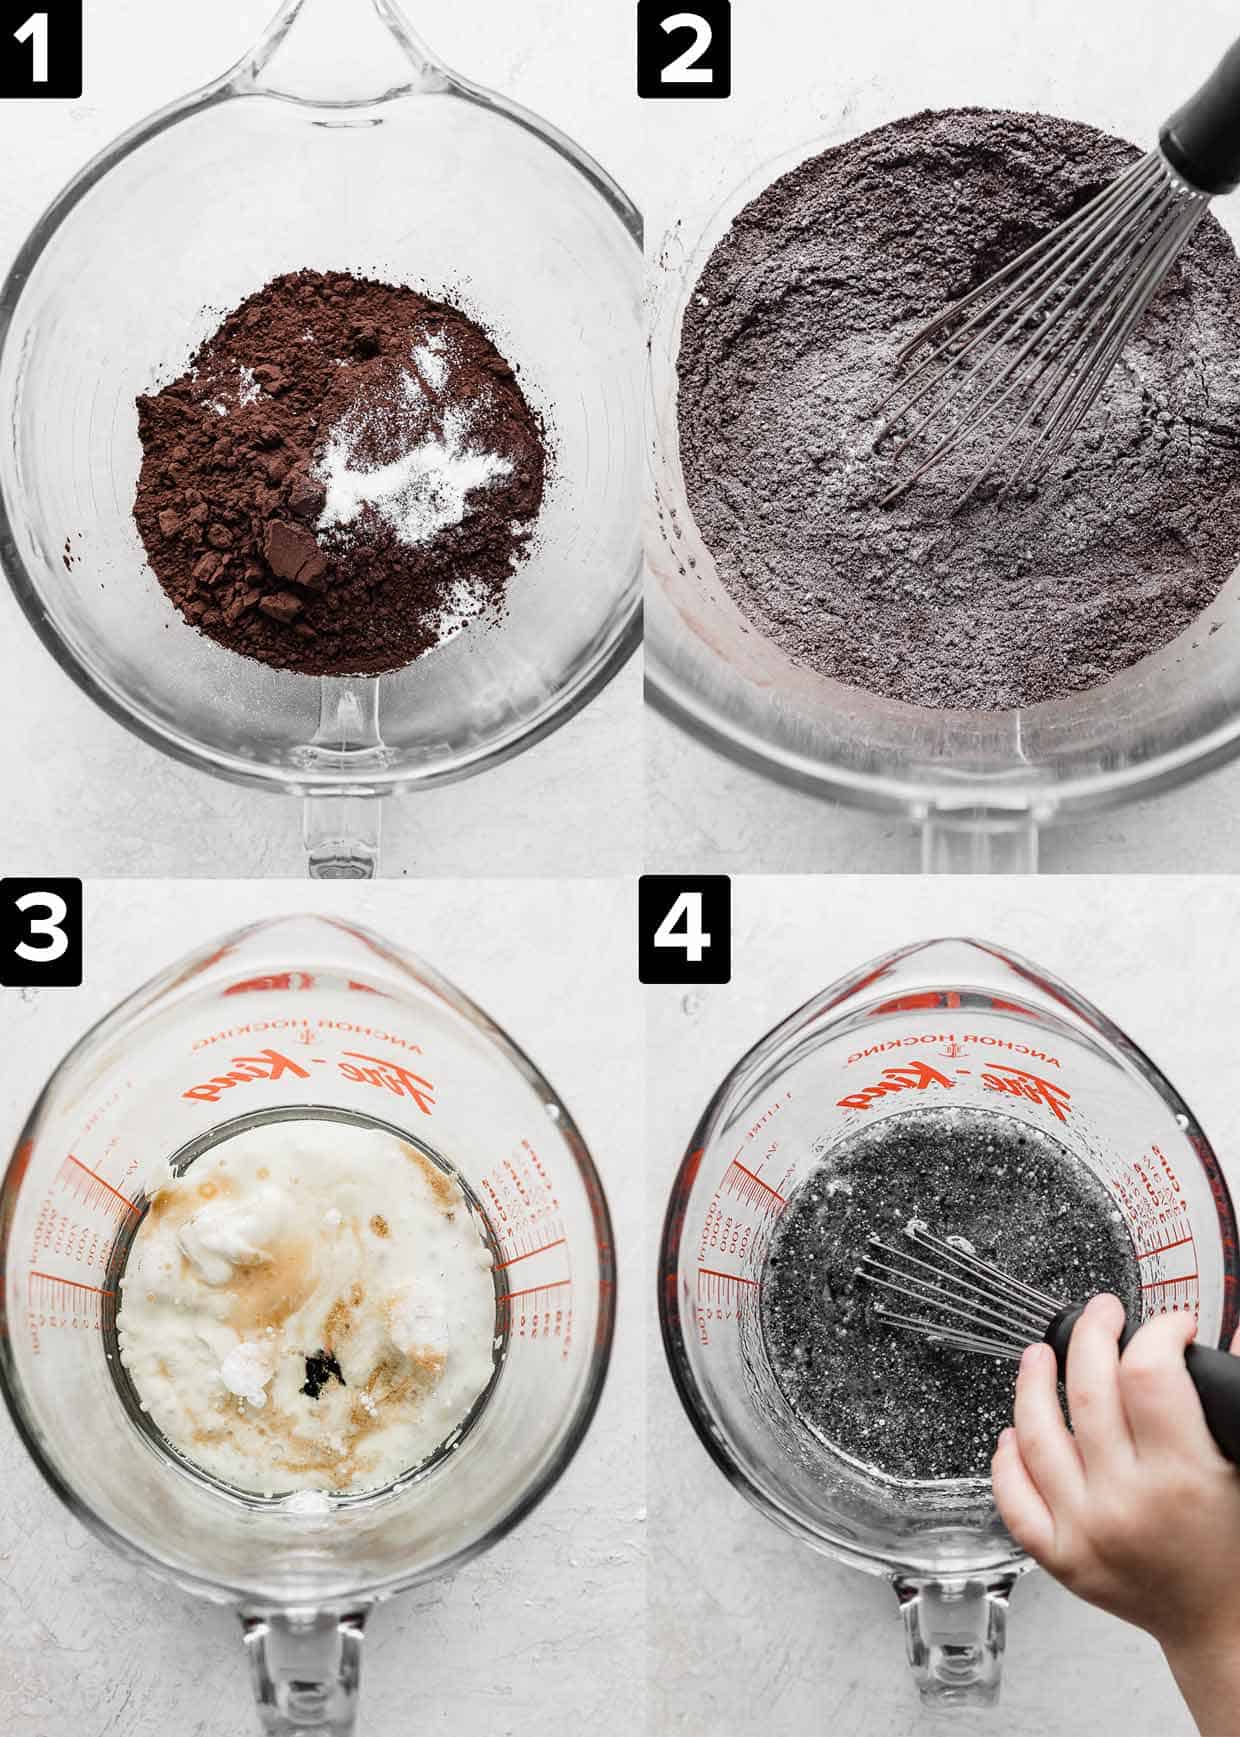 Four images showing how to make a black cocoa powder based cupcake for decorating as Ghost Cupcakes.